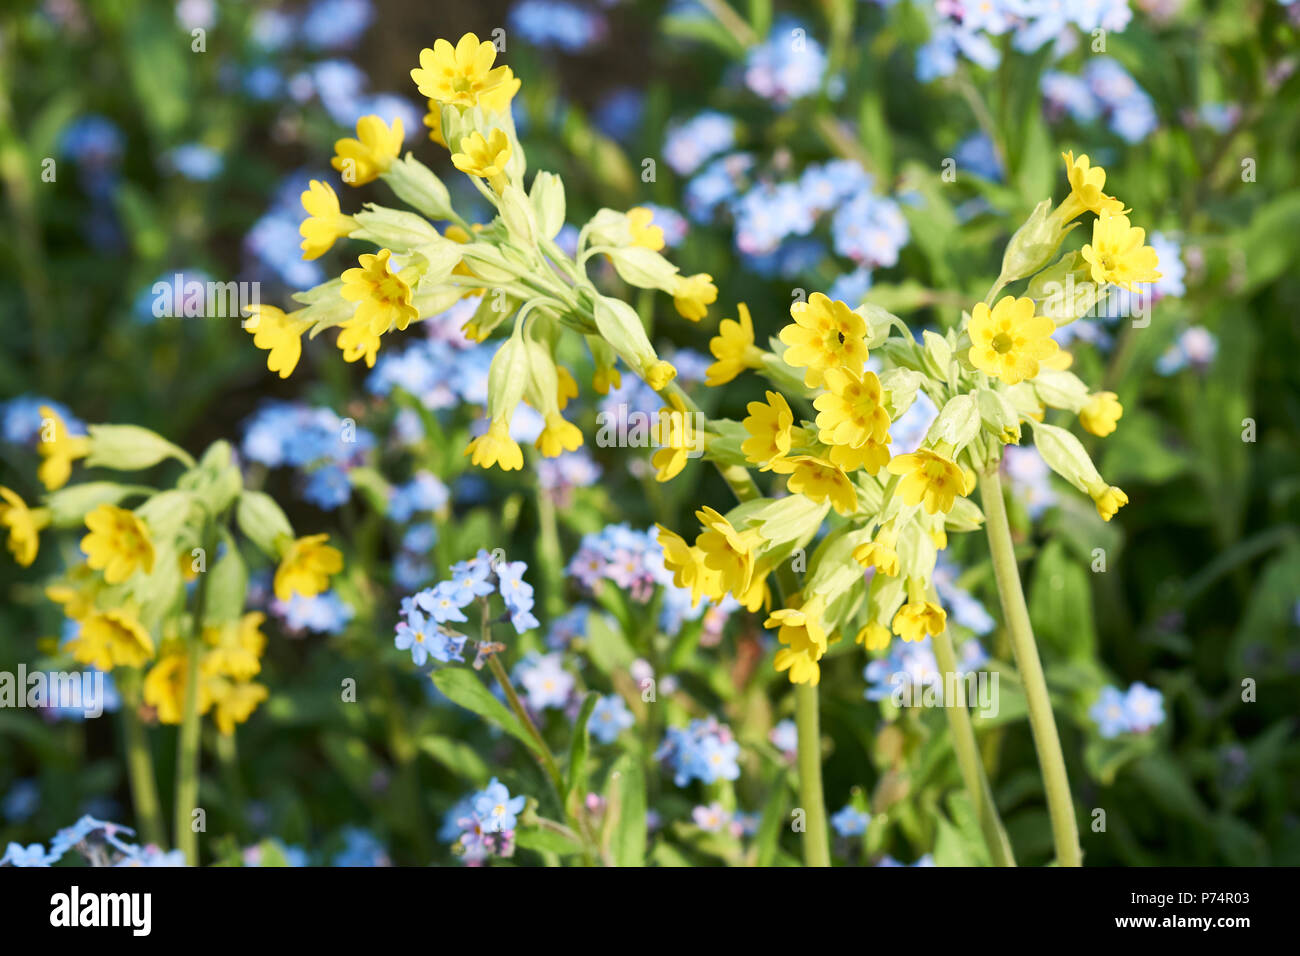 Cowslips (Primula veris) flowering plants growing in a garden flowerbed during springtime. UK. Stock Photo